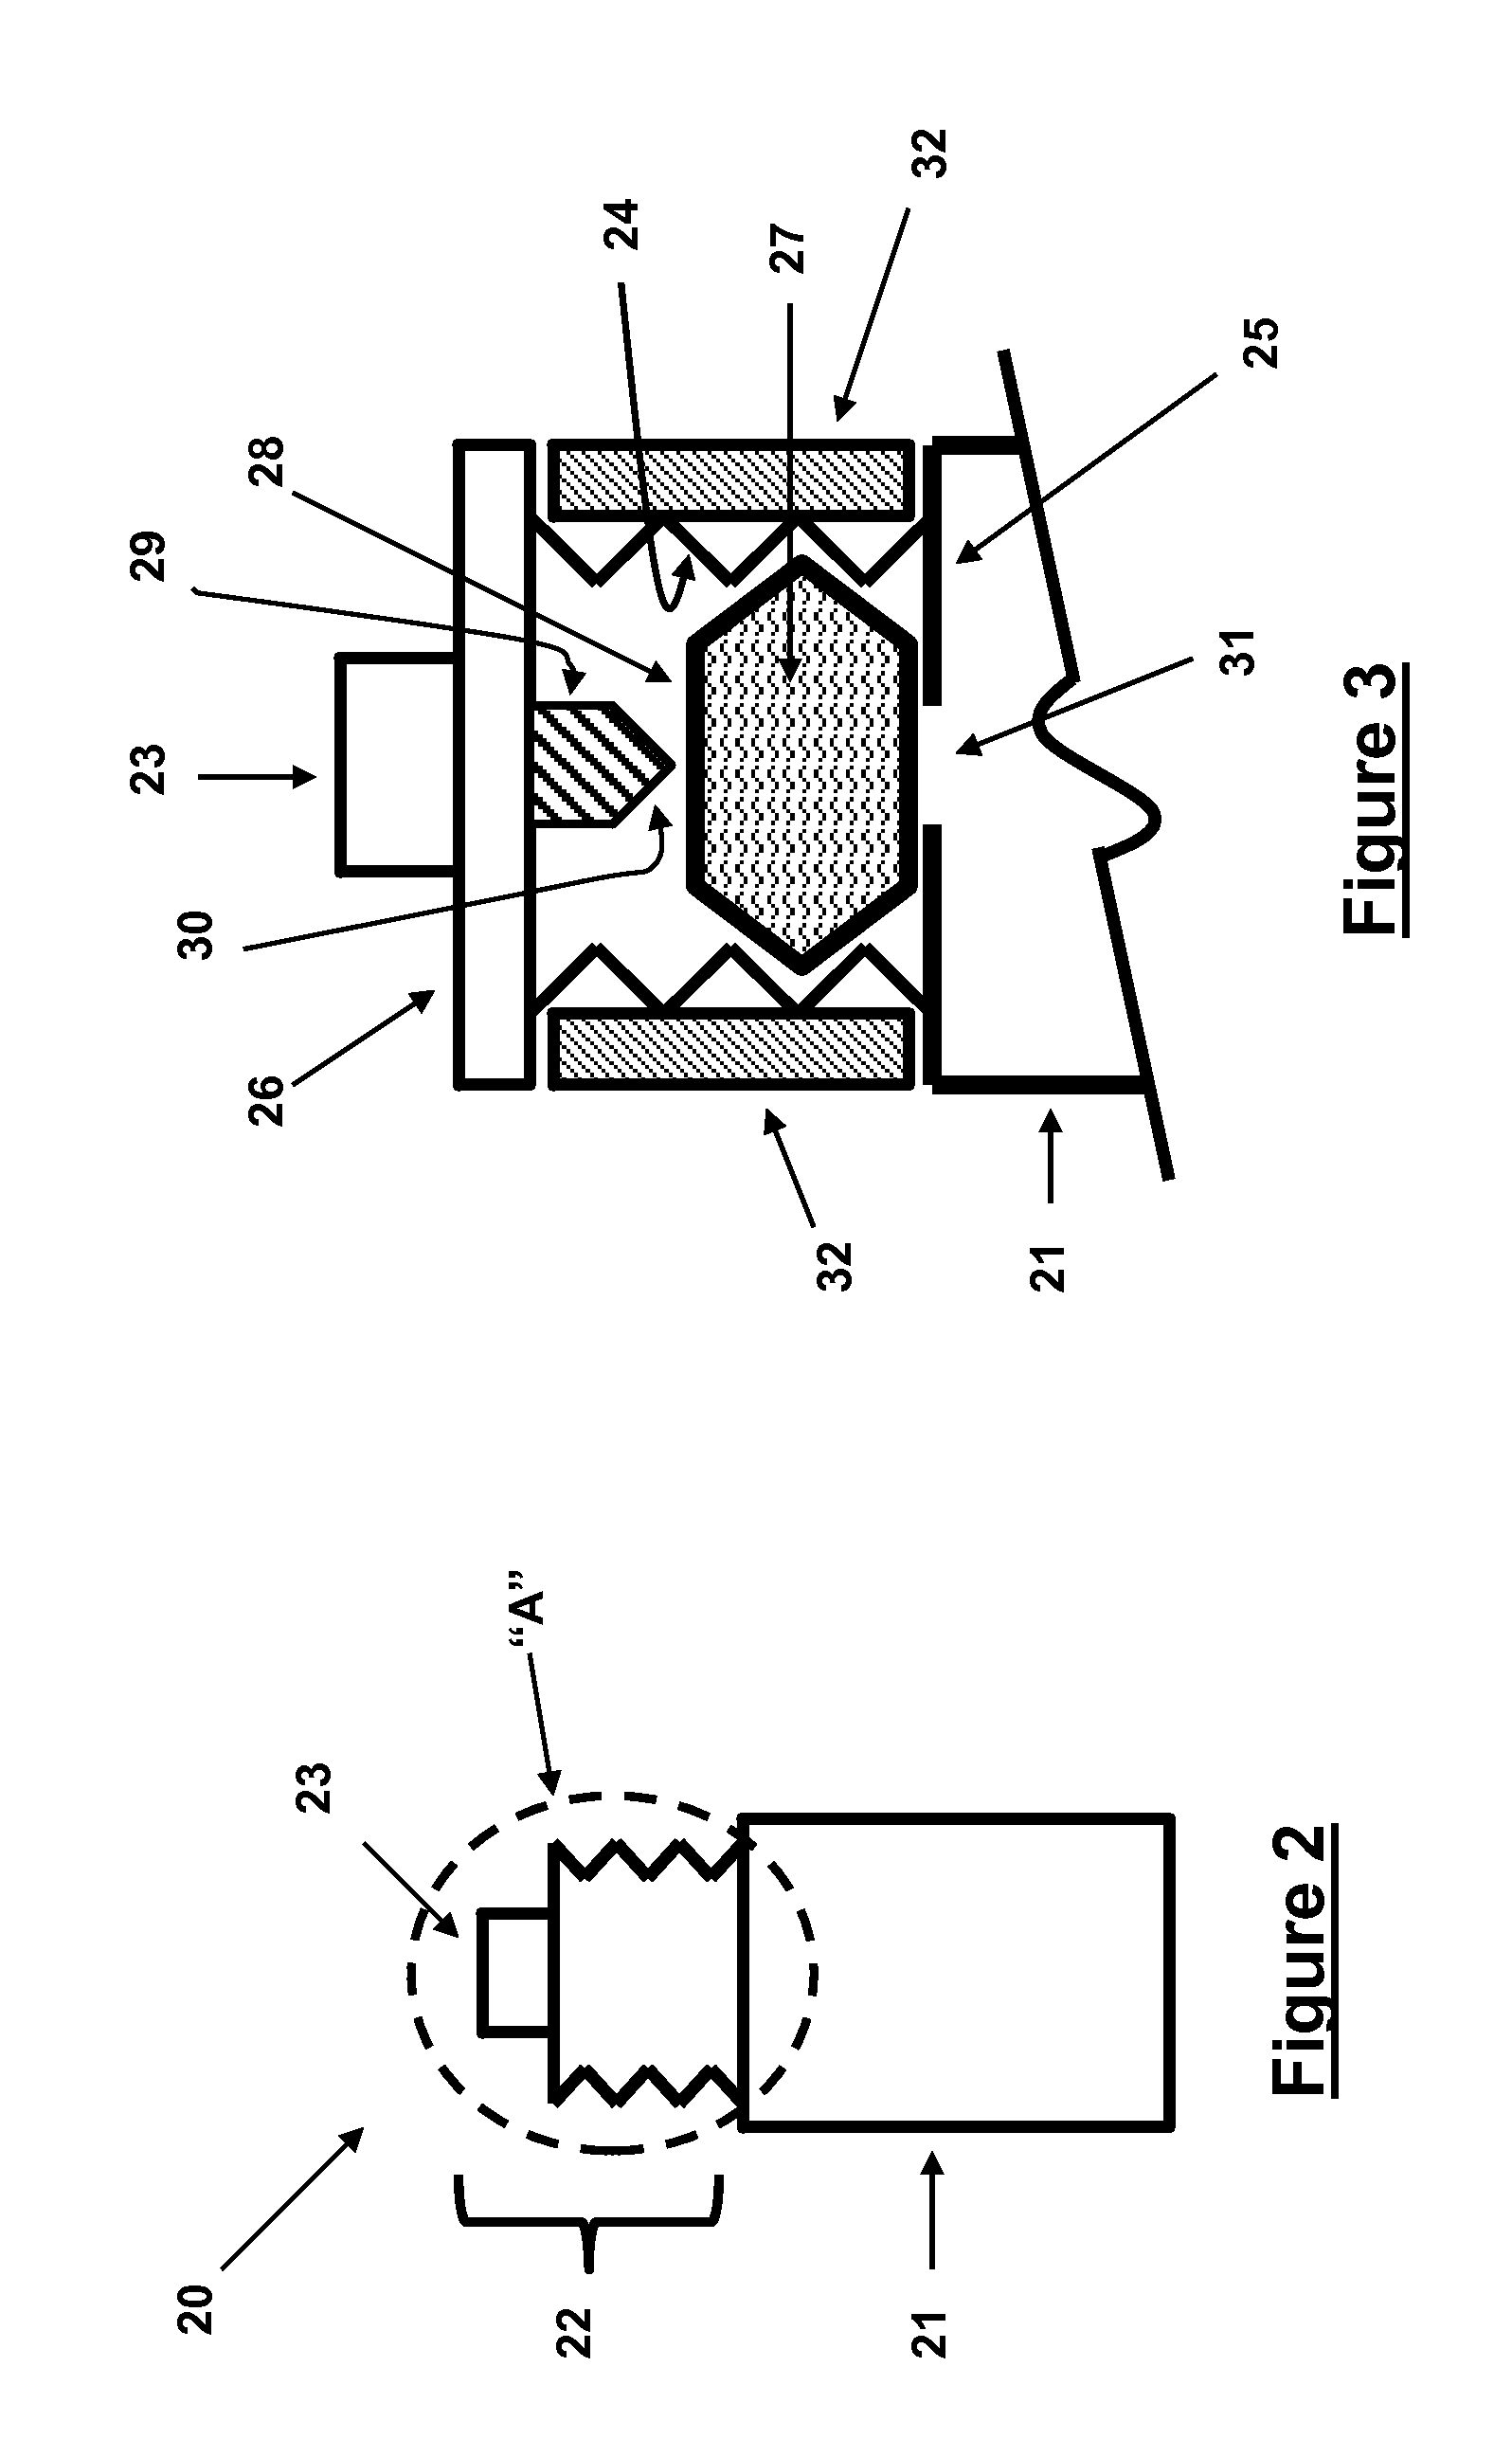 Power Source For Starting Engines of Vehicles and the Like